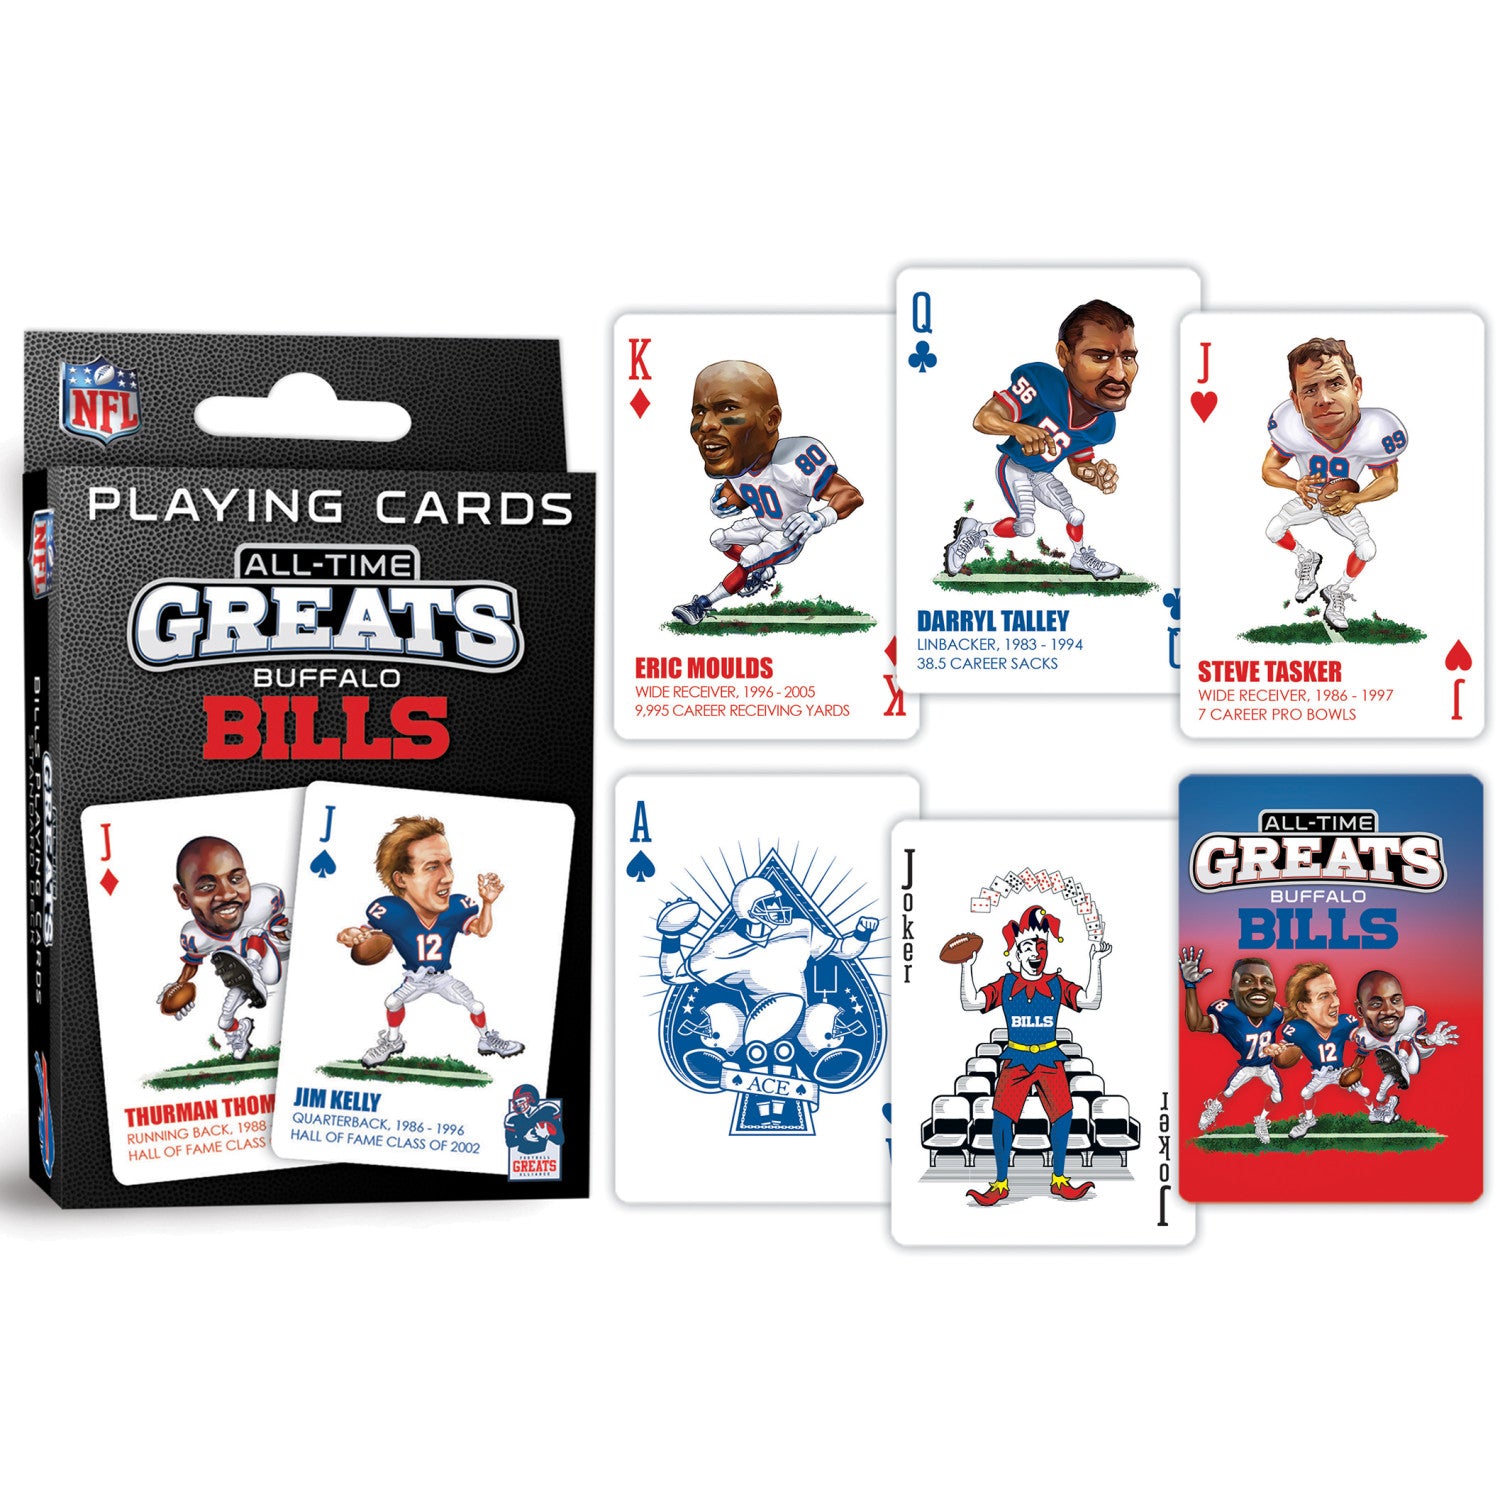 Buffalo Bills All-Time Greats Playing Cards - 54 Card Deck